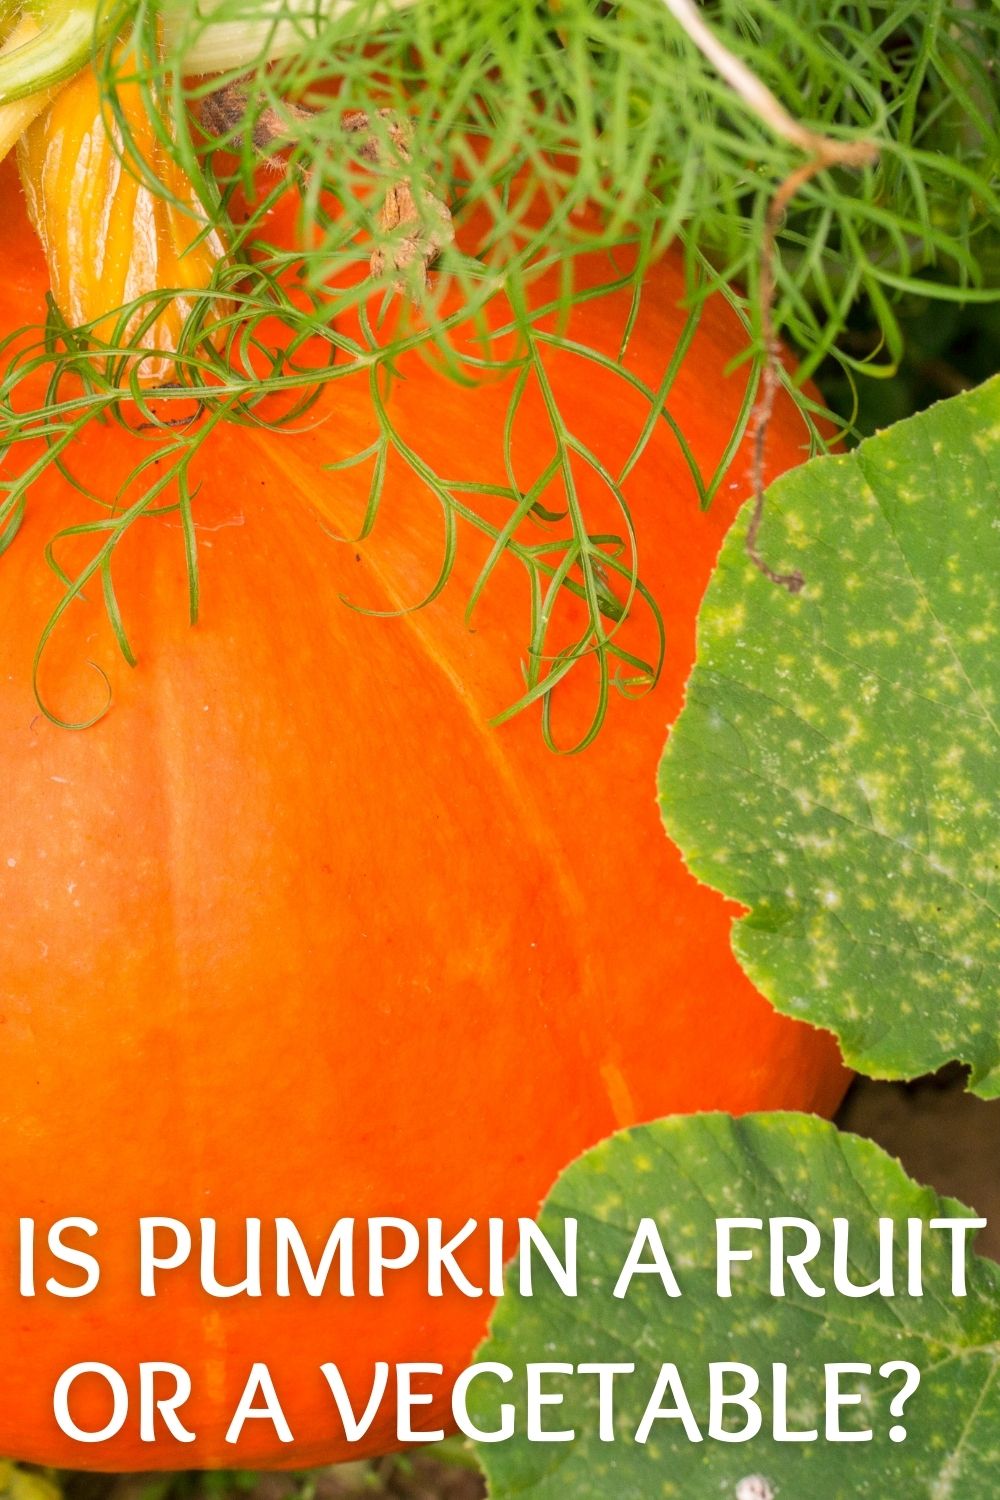 Is pumpkin a fruit or a vegetable?